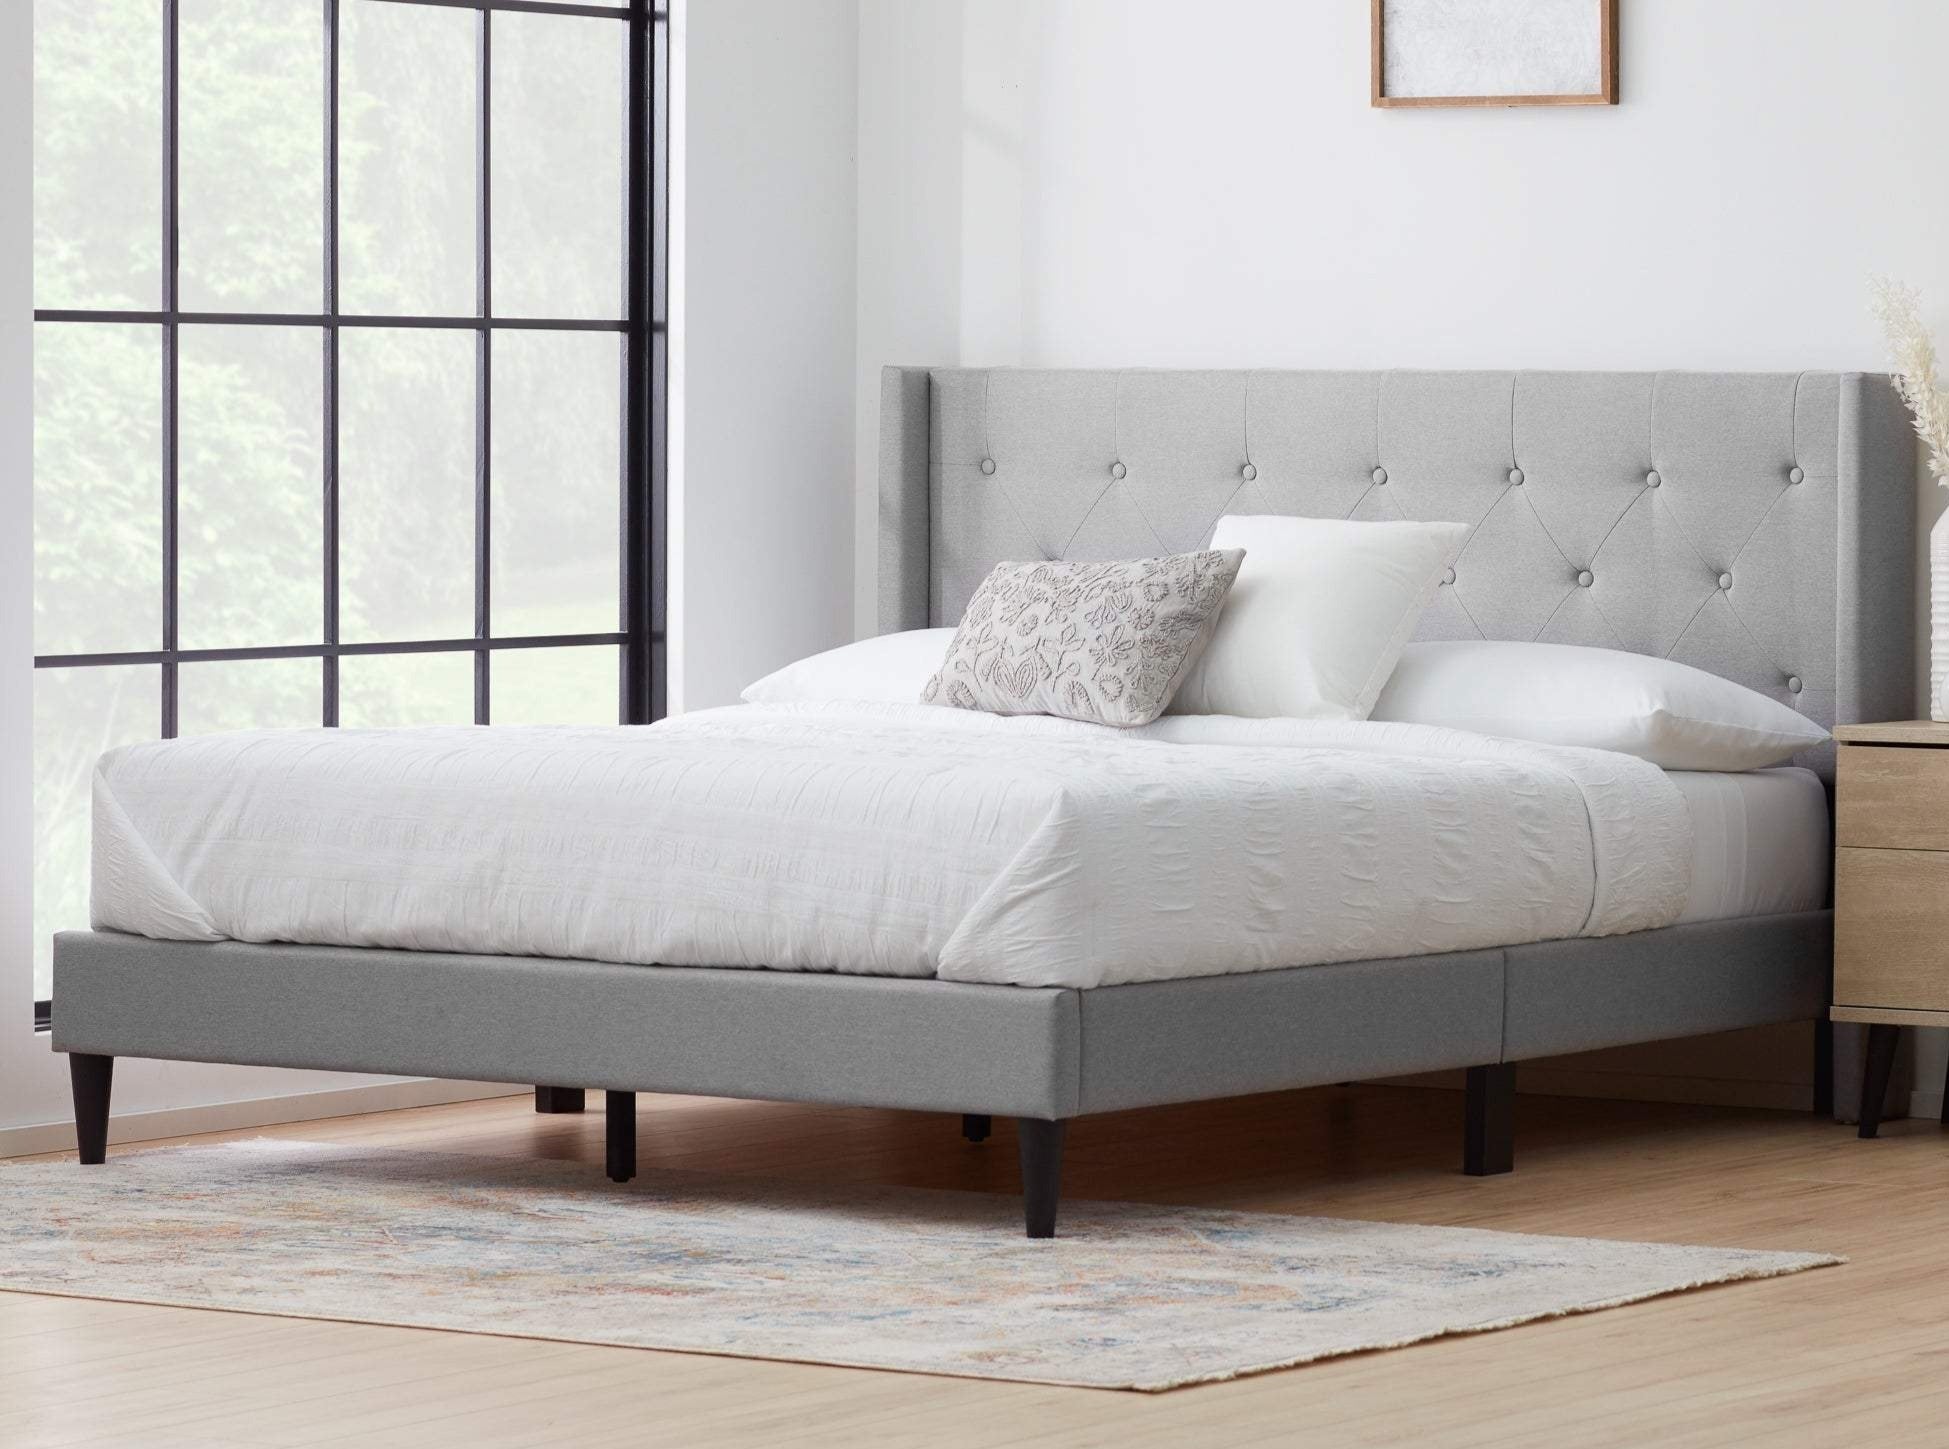 Palermo Upholstered Fabric Double Bed in Grey Colour